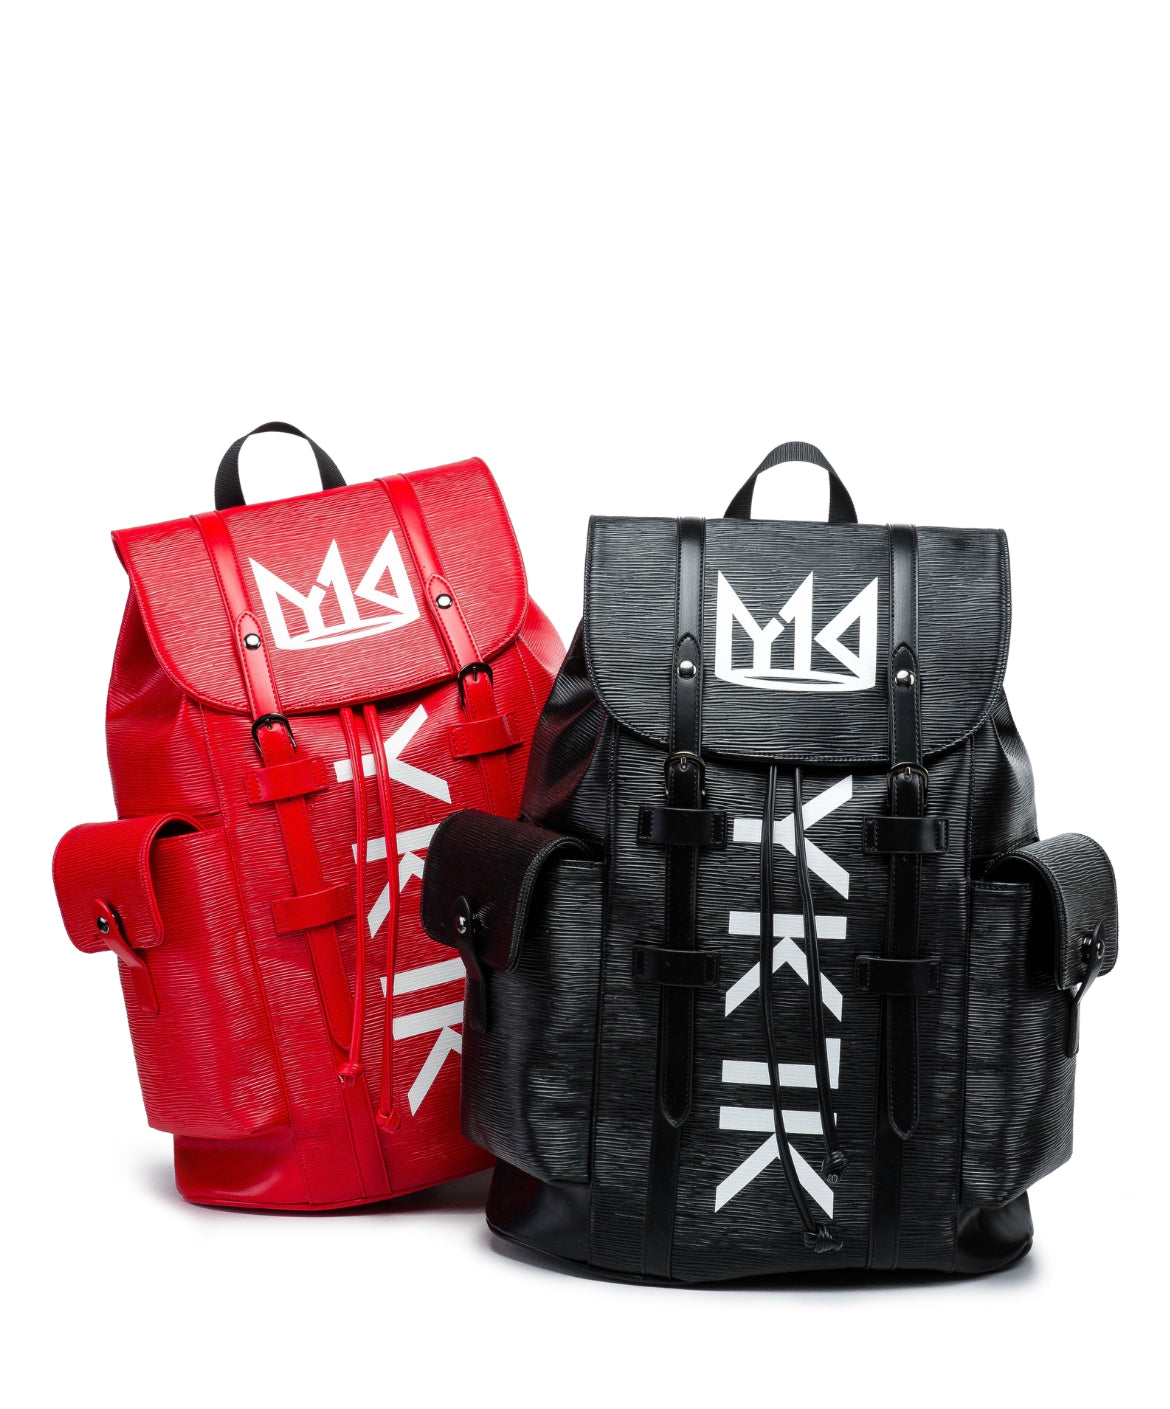 YK1K LEATHER BACKPACK